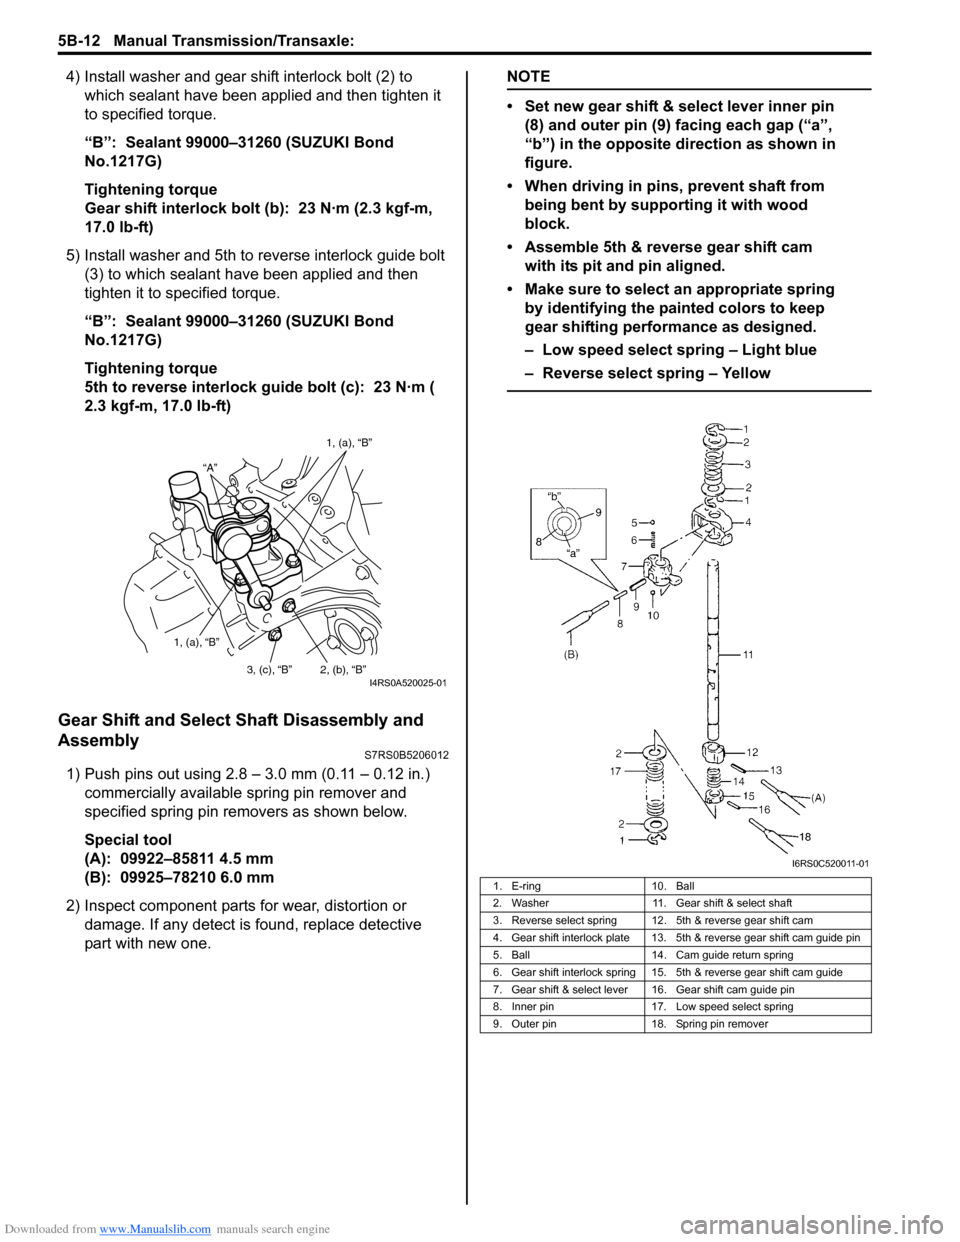 SUZUKI SWIFT 2007 2.G Service Service Manual Downloaded from www.Manualslib.com manuals search engine 5B-12 Manual Transmission/Transaxle: 
4) Install washer and gear shift interlock bolt (2) to which sealant have been app lied and then tighten 